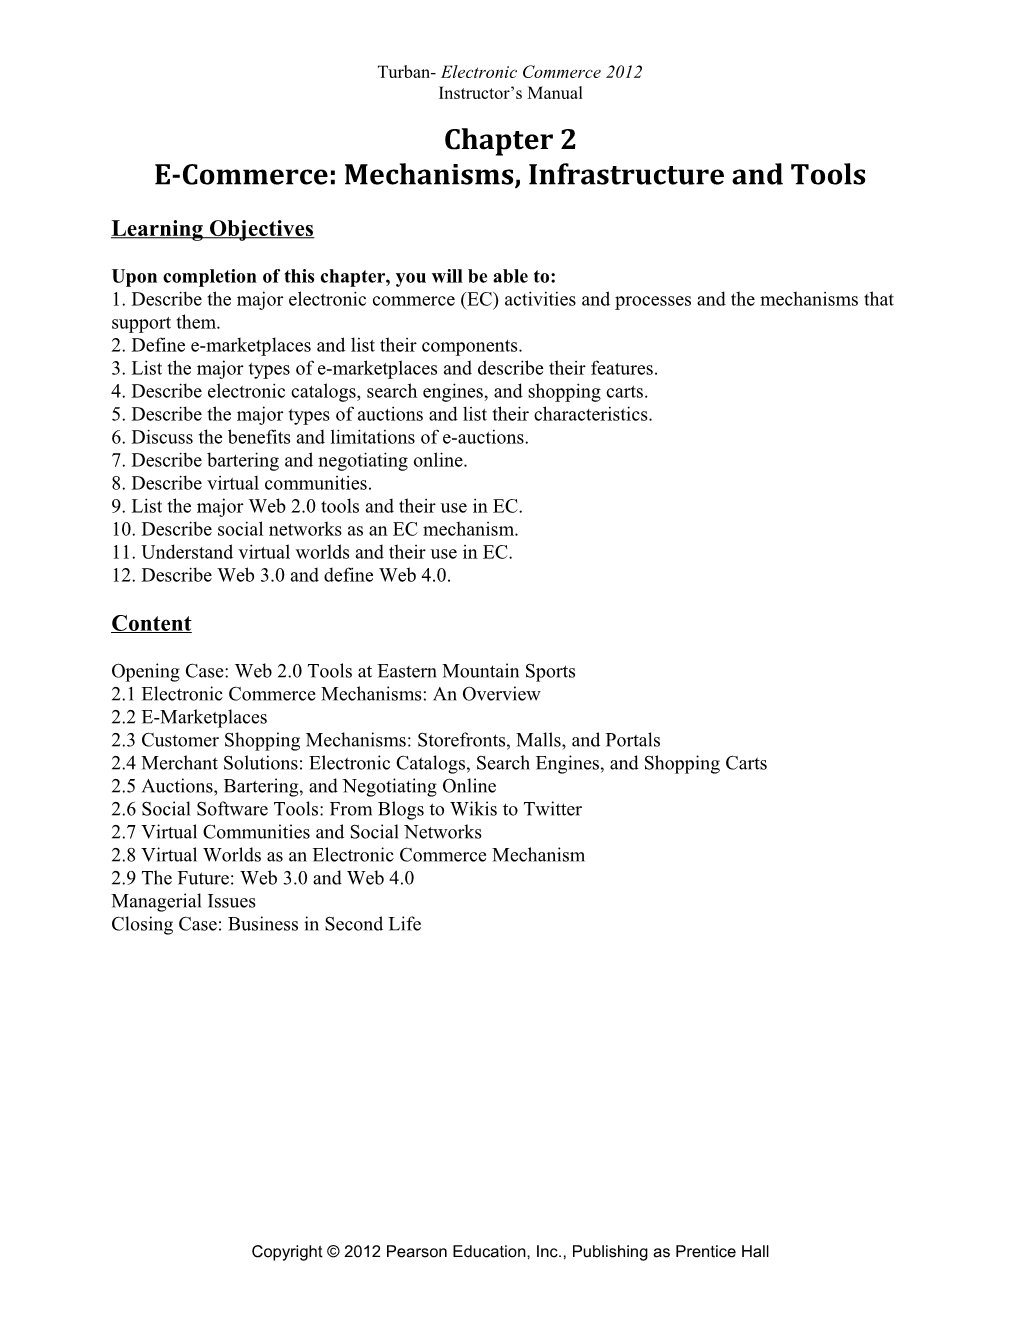 E-Commerce: Mechanisms, Infrastructure and Tools